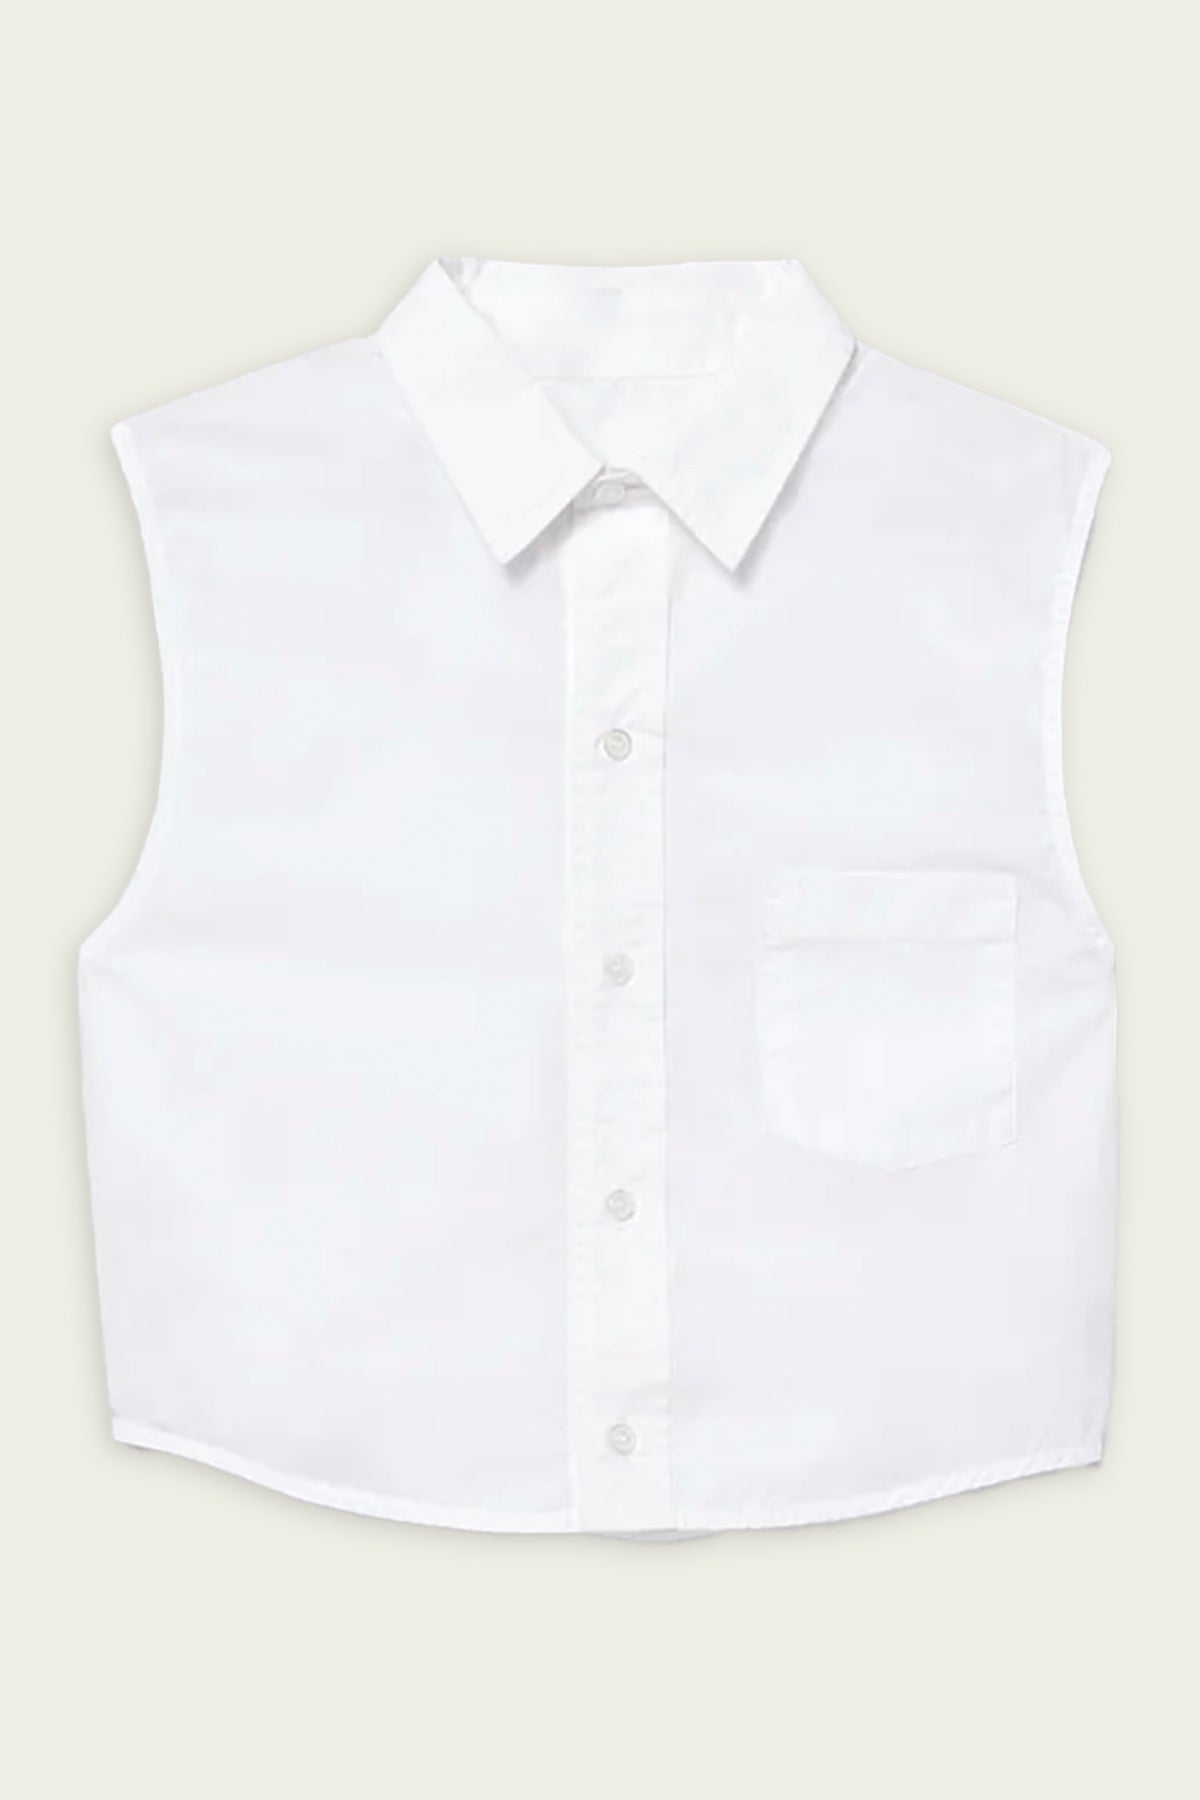 Anders Sleeveless Crop in White - shop - olivia.com